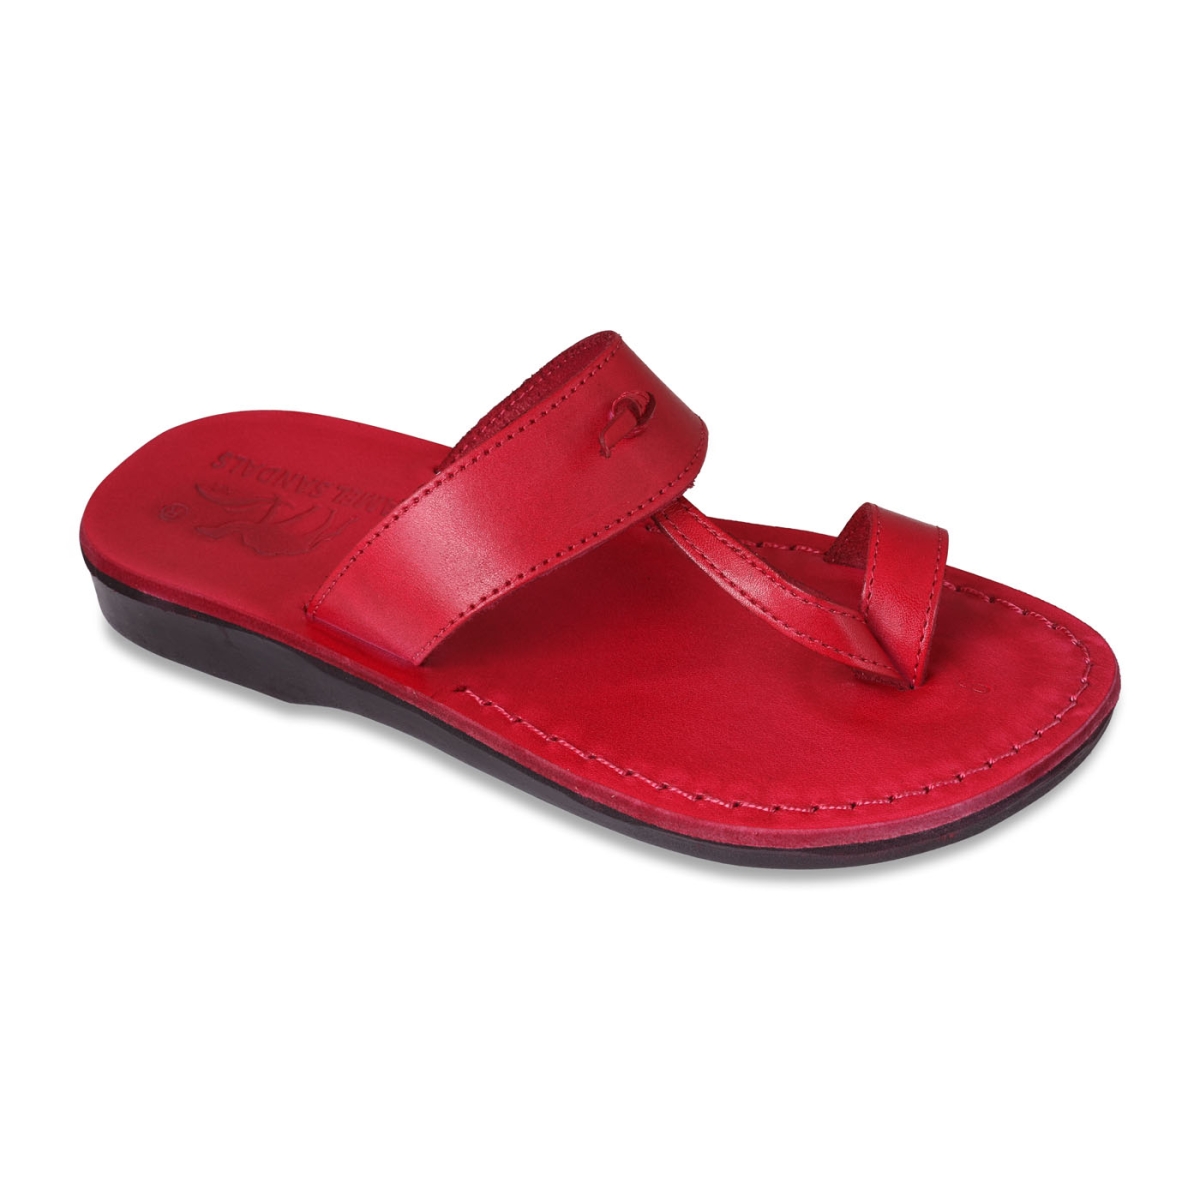 Oasis Handmade Leather Sandals , Clothing | Judaica Web Store